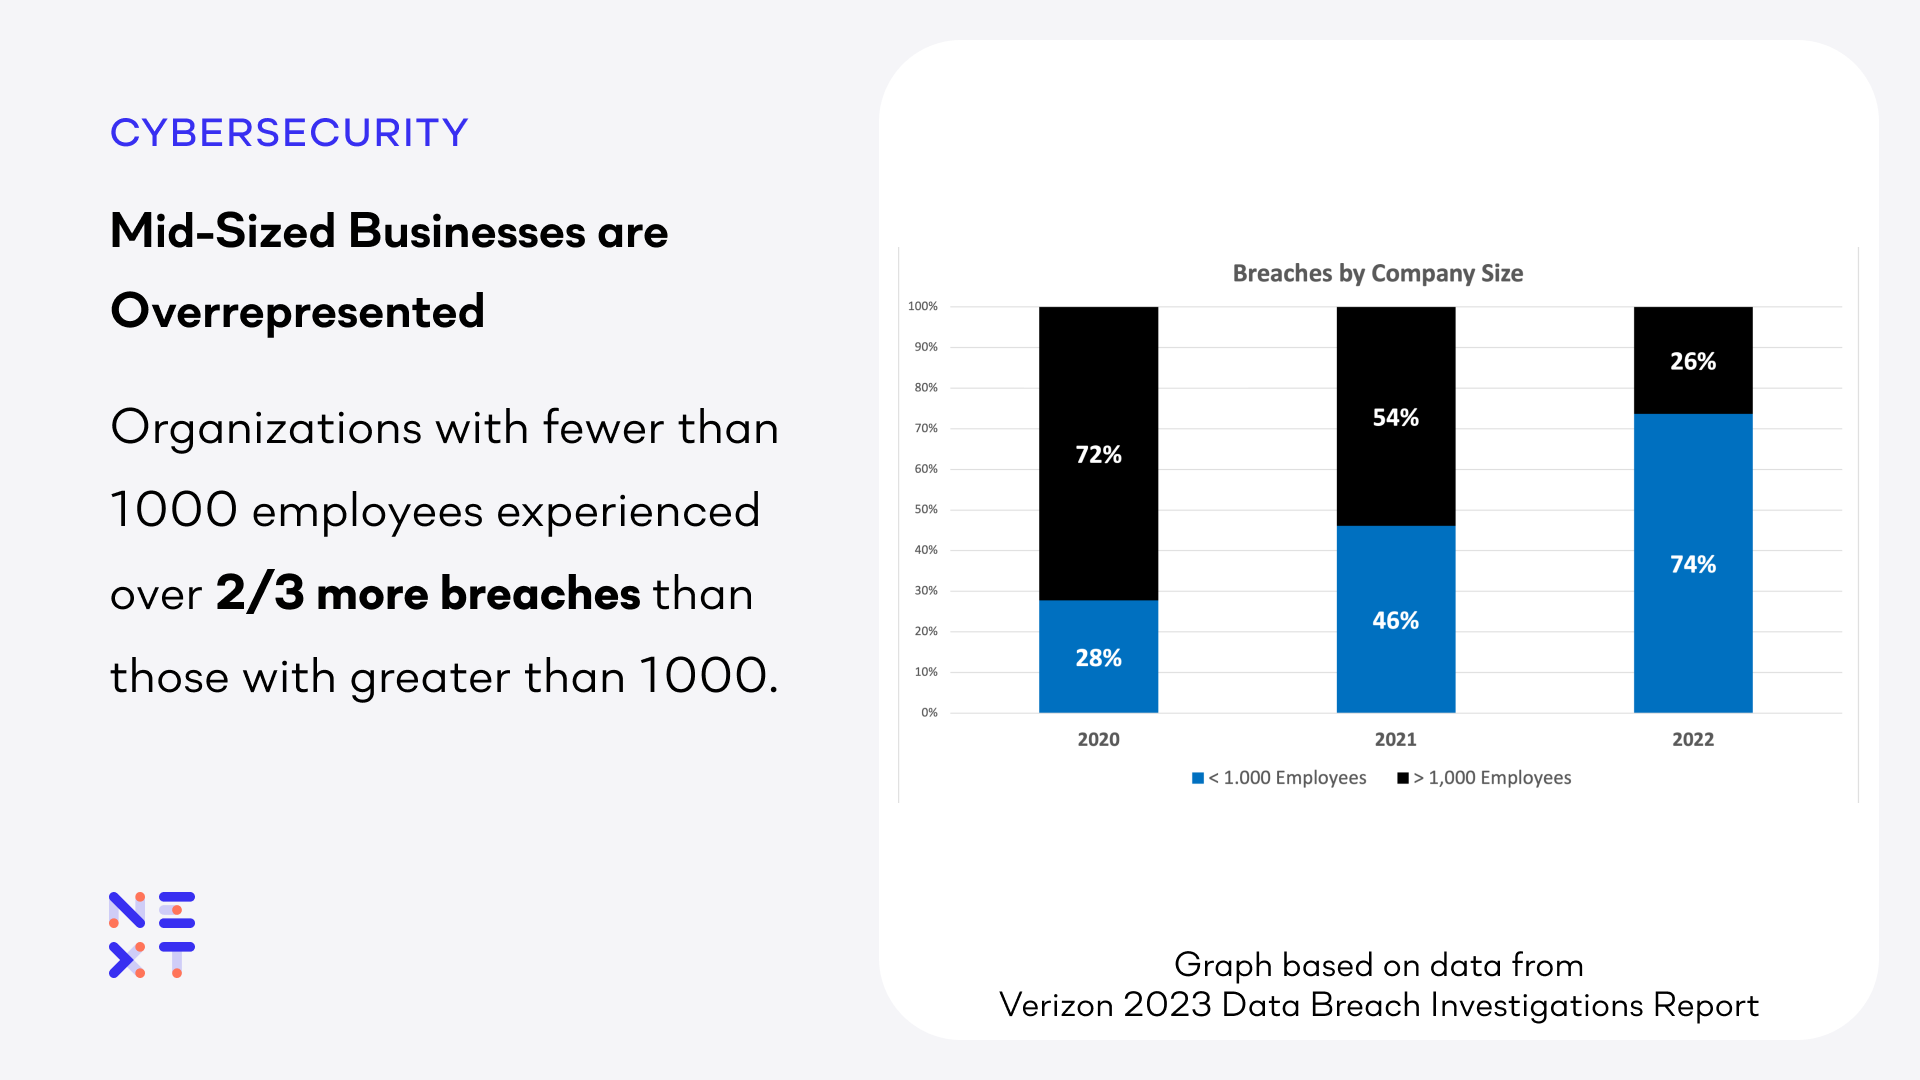 The 2023 Verizon DBIR report says businesses with fewer than 1000 employees experience 2/3 more breaches than those with more than 1000 employees.